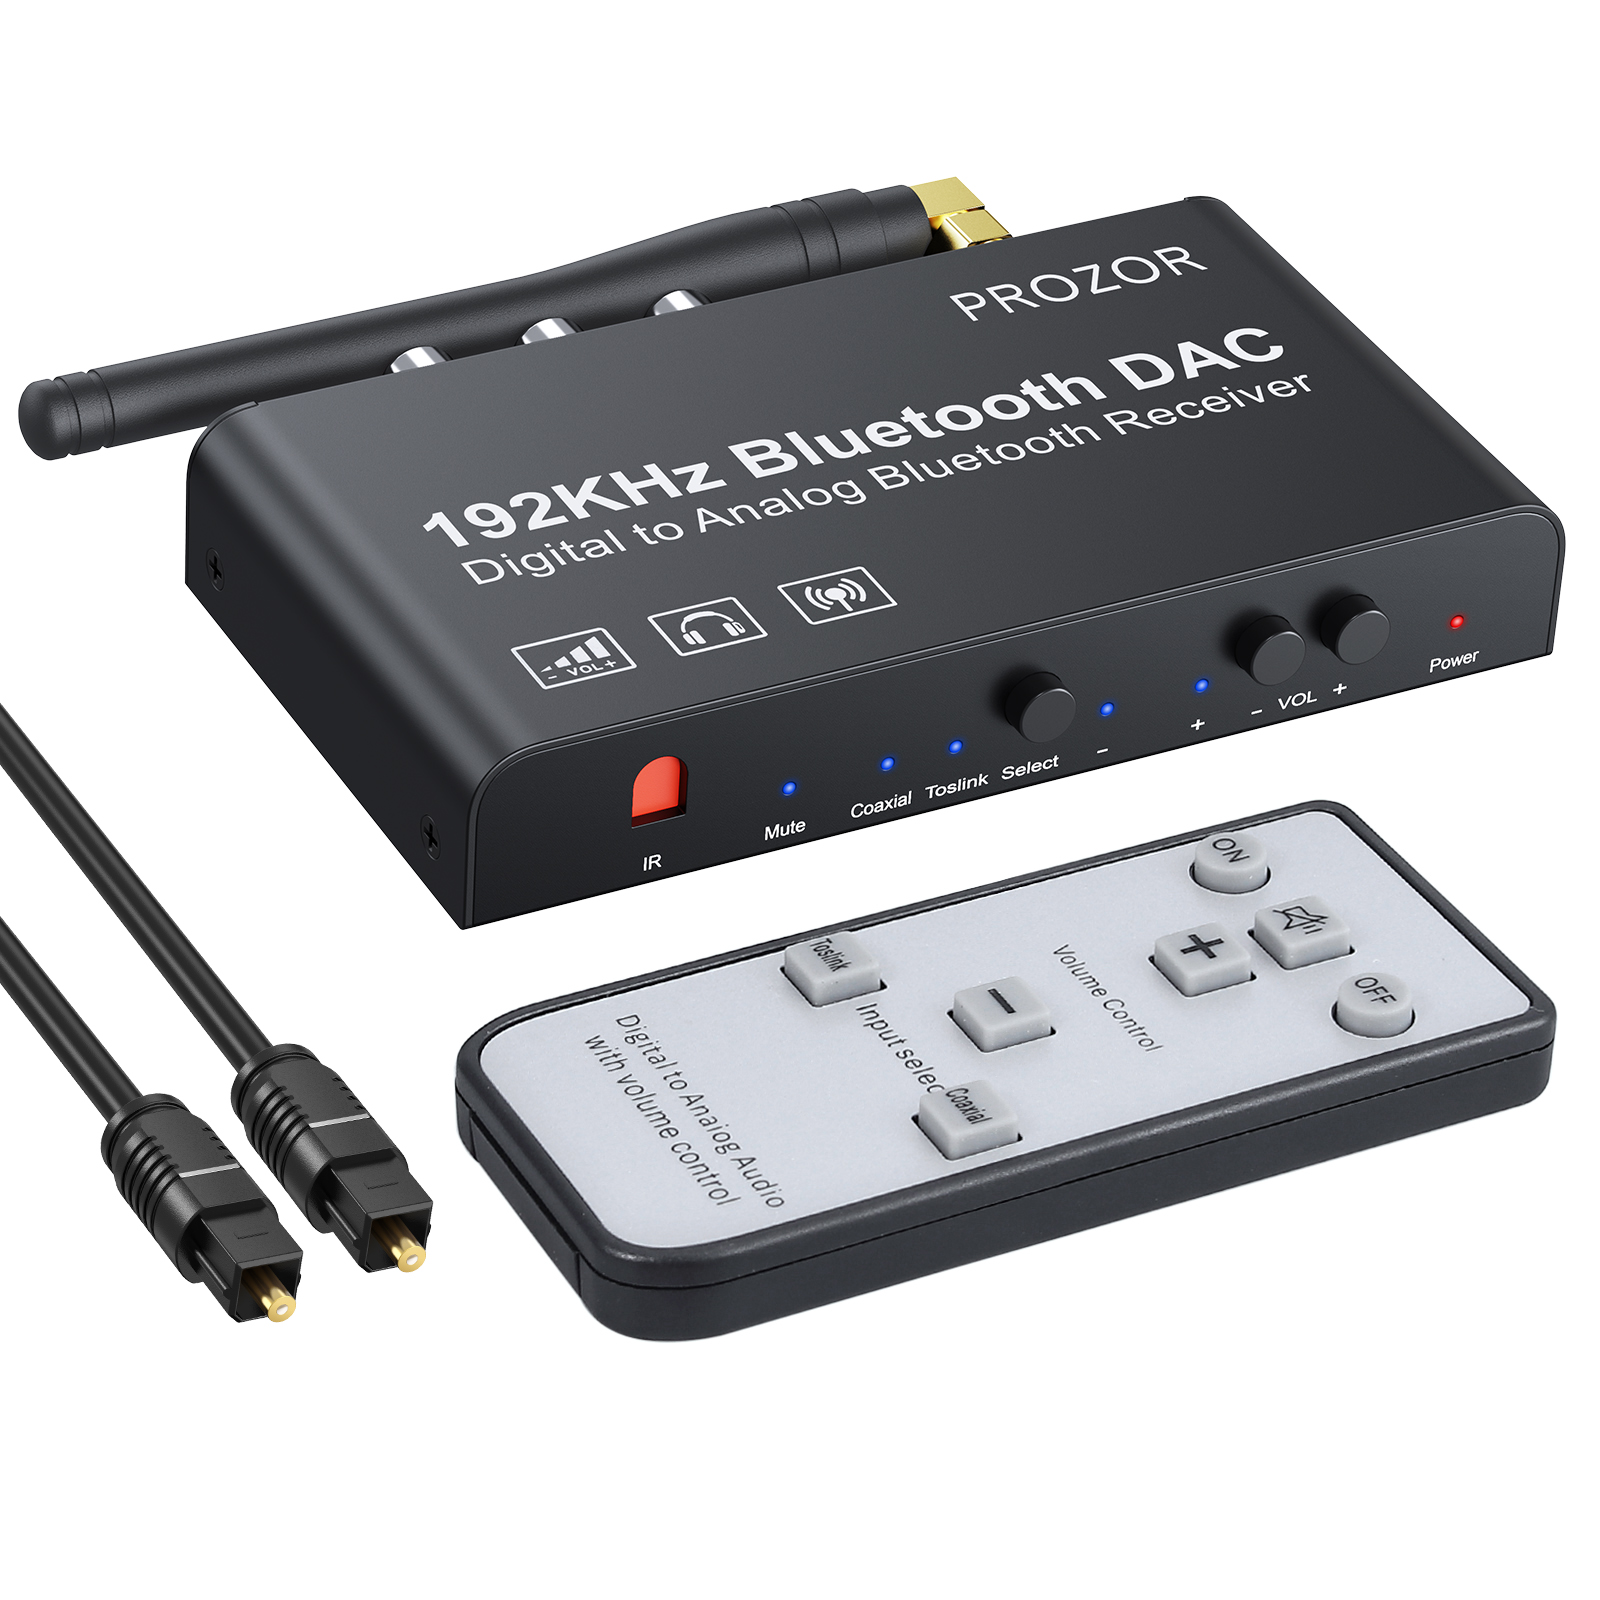 DAC Converter Built-in Bluetooth with Remote Control